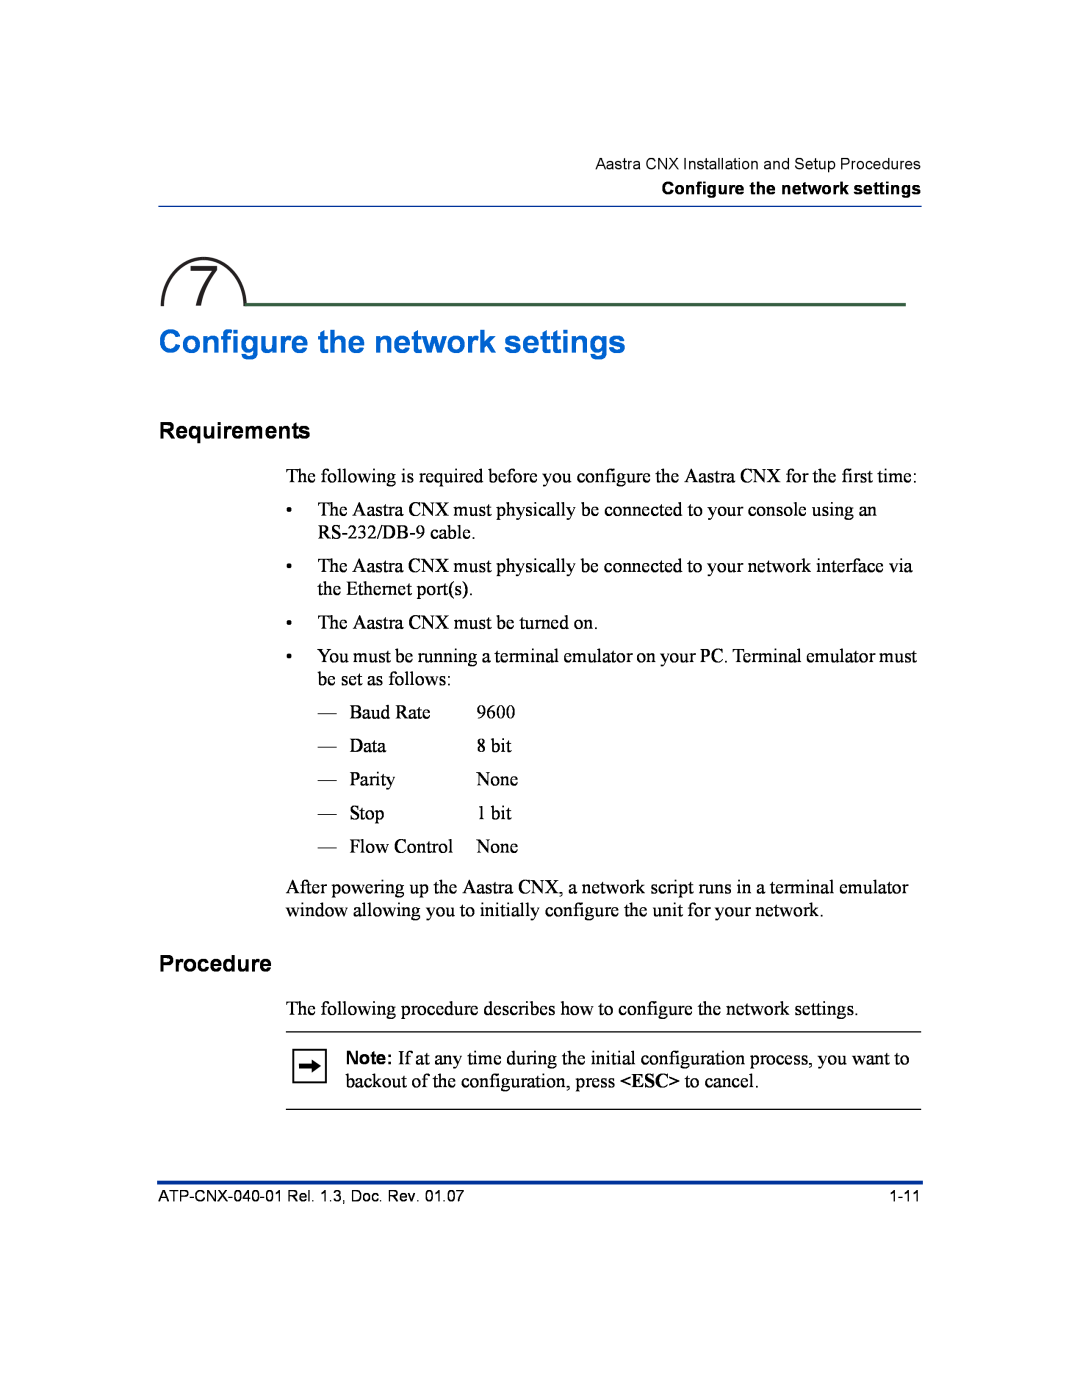 Aastra Telecom ATP-CNX-040-01 manual Configure the network settings, Requirements, Procedure 